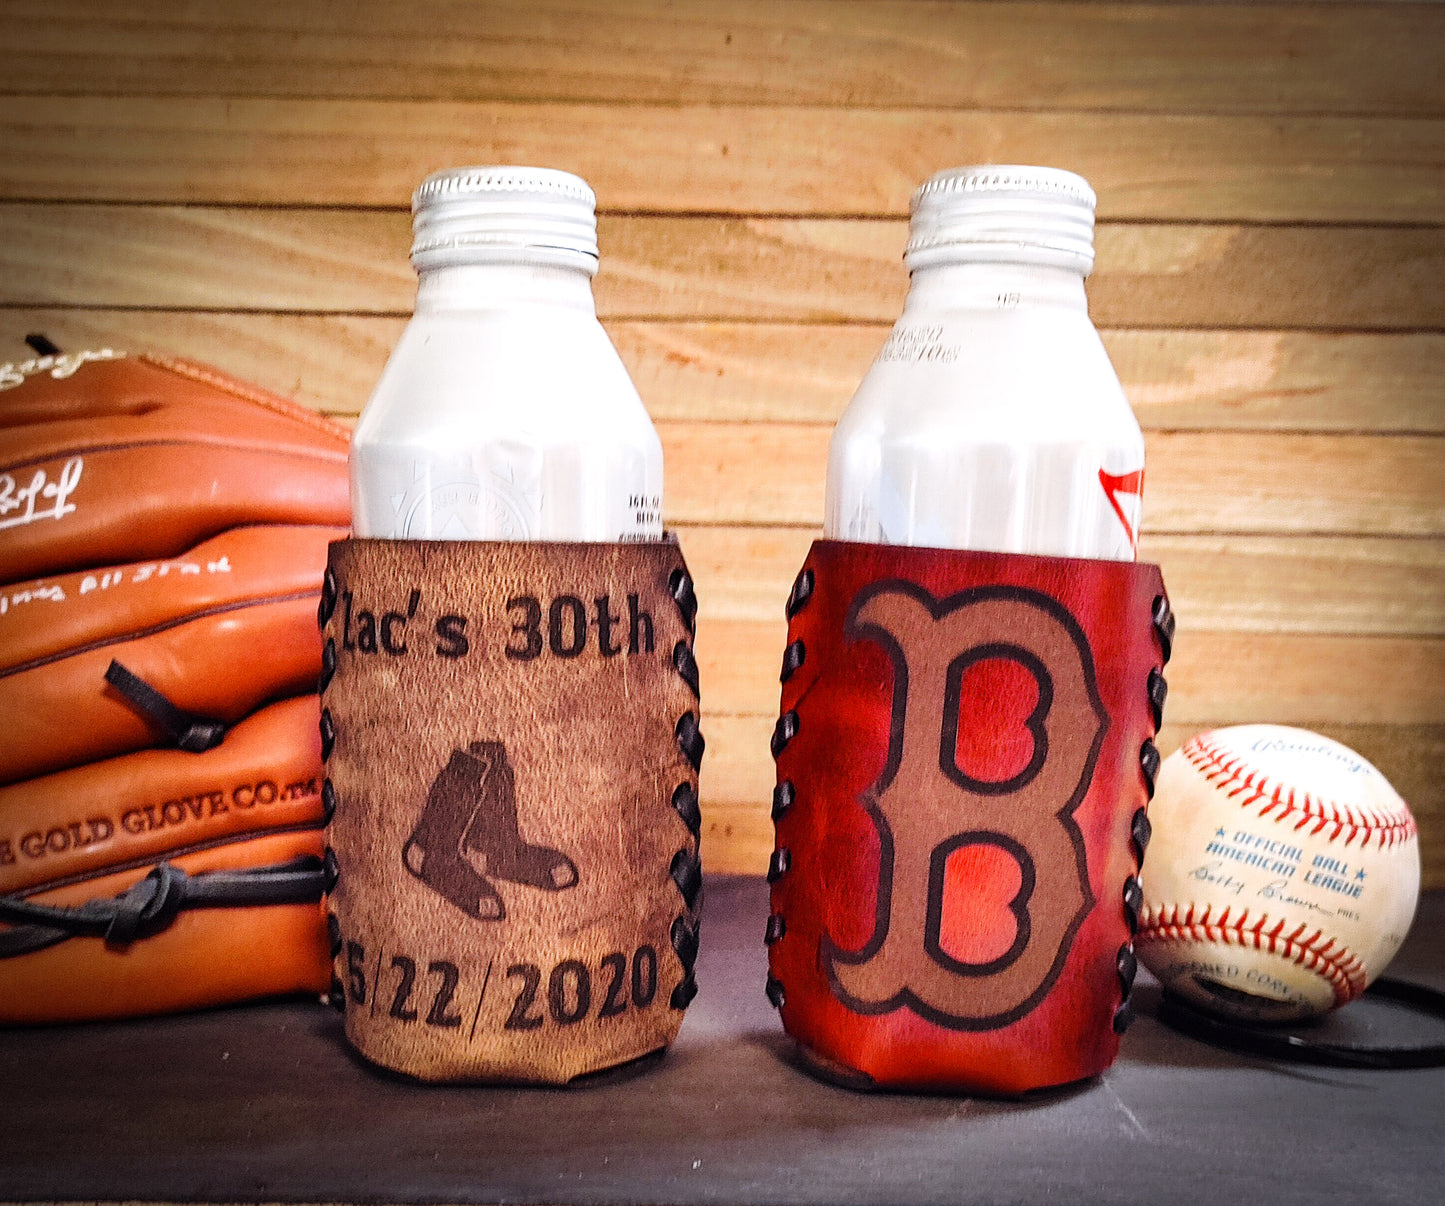 Boston Red Sox customized leather koozies in brown and red with Boston b and personalization that says Zach's 30th birthday on Coors light can Father's Day gift ideas for baseball fans